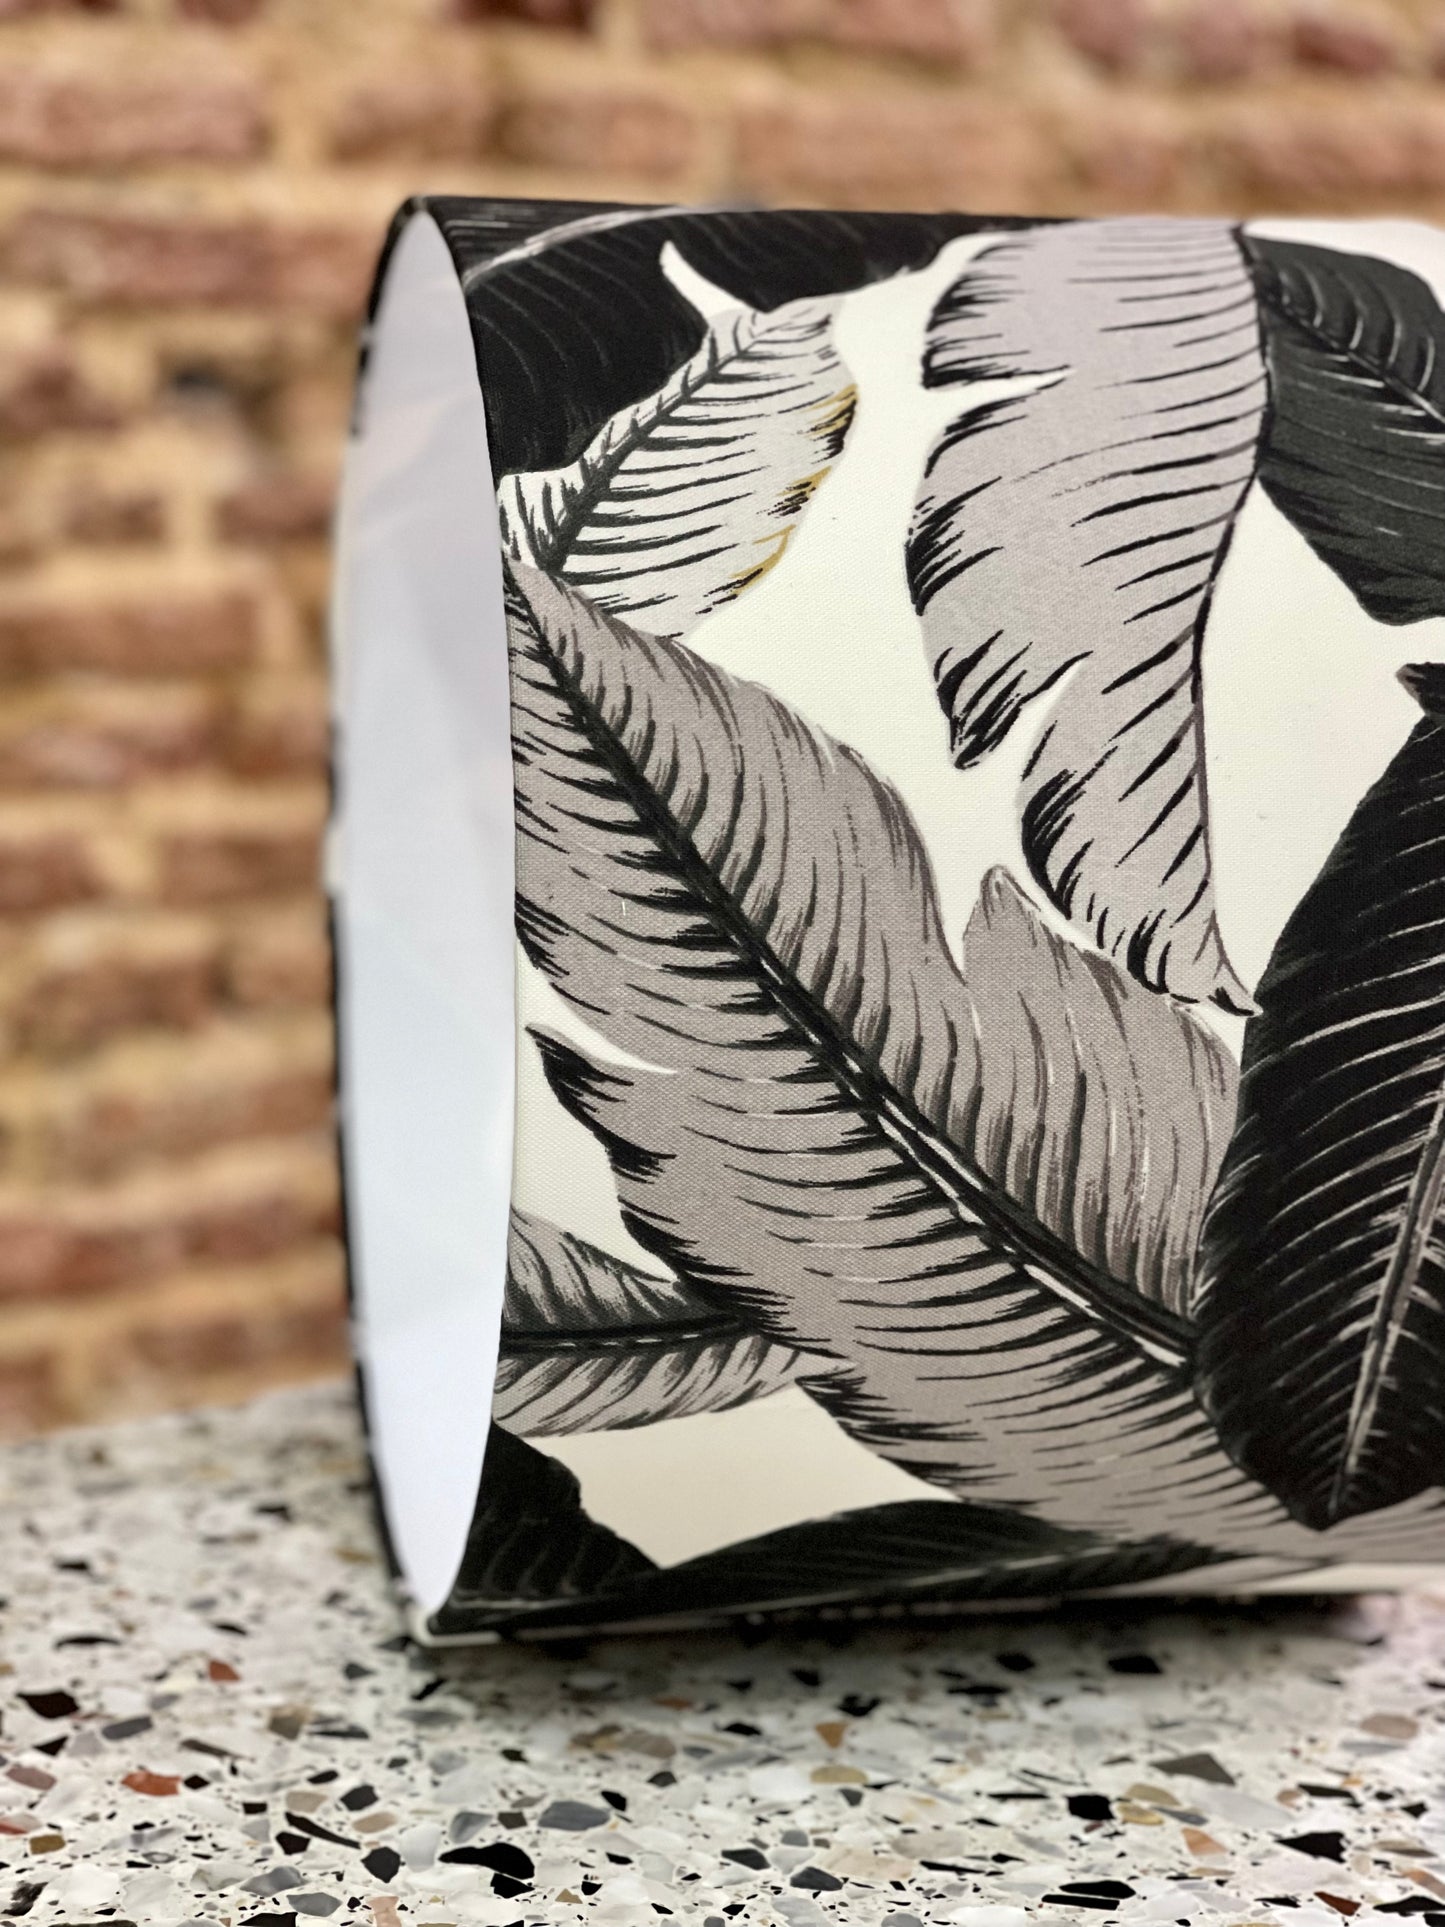 Handmade fabric lampshades Singapore in Tommy Bahama black and white leaf pattern